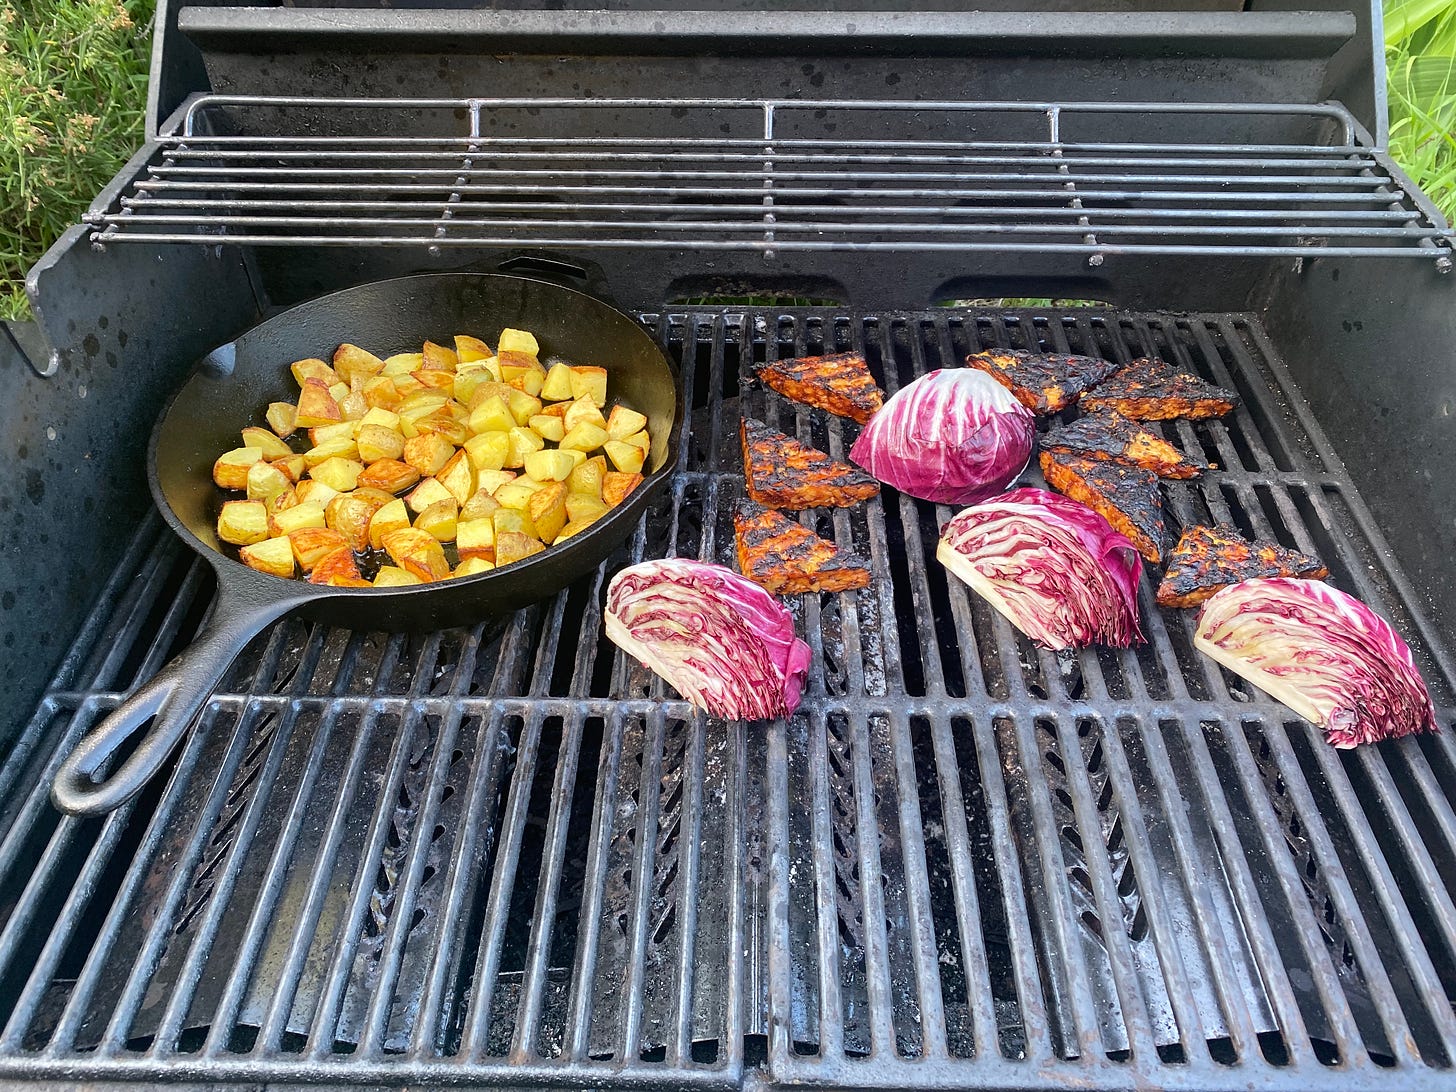 Various things on the grill: a cast iron pan of diced potatoes, triangles of blackened tempeh, and wedges of radicchio.